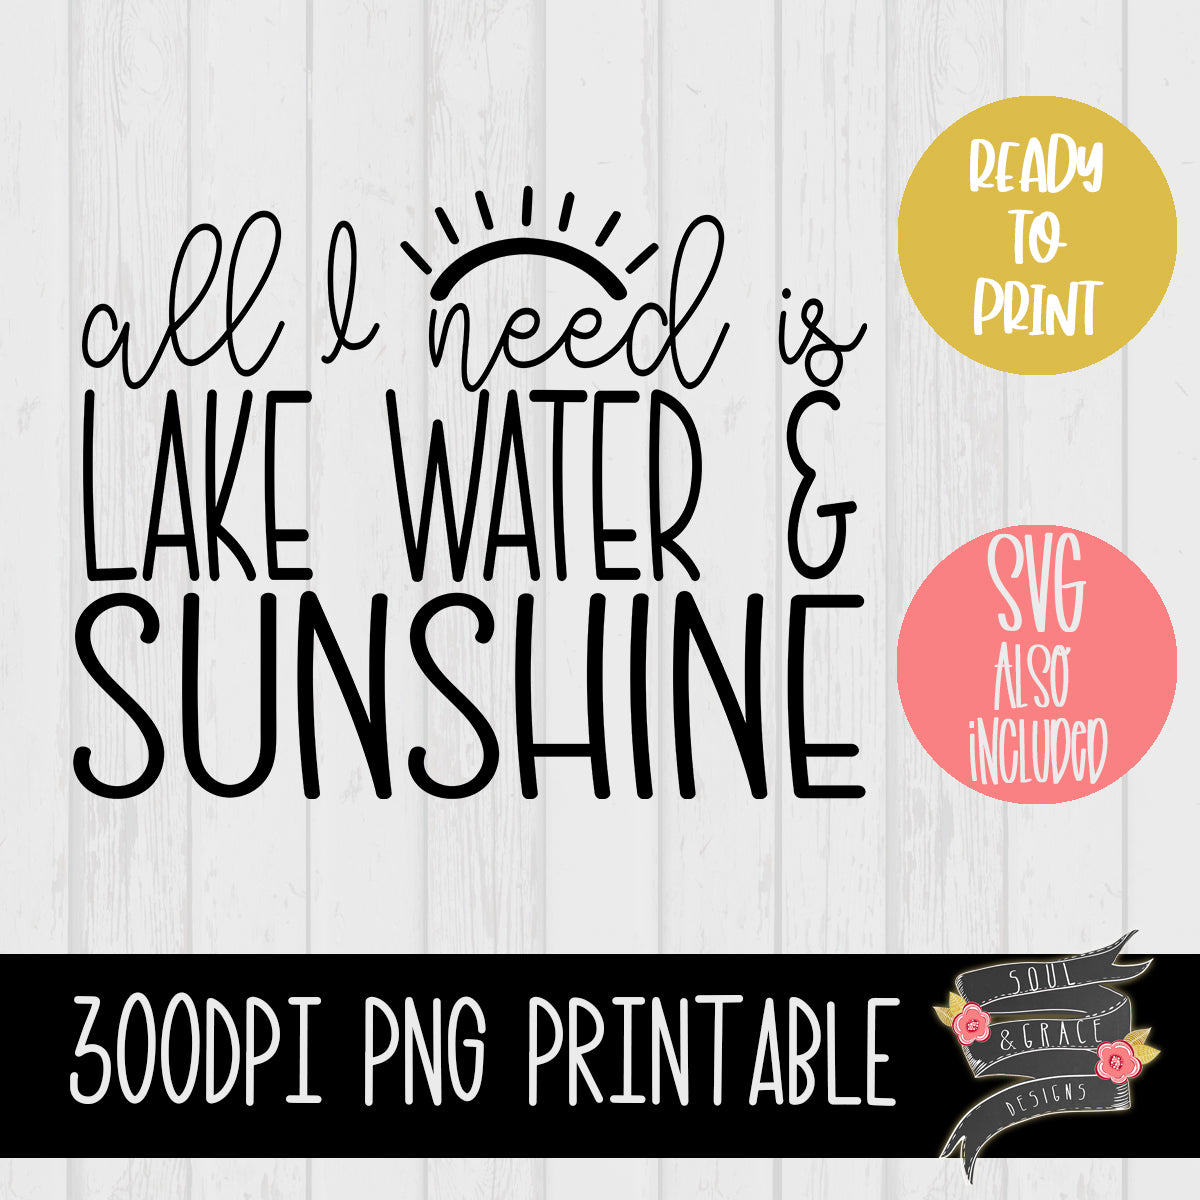 All I need is lake water and sunshine [PNG & SVG]